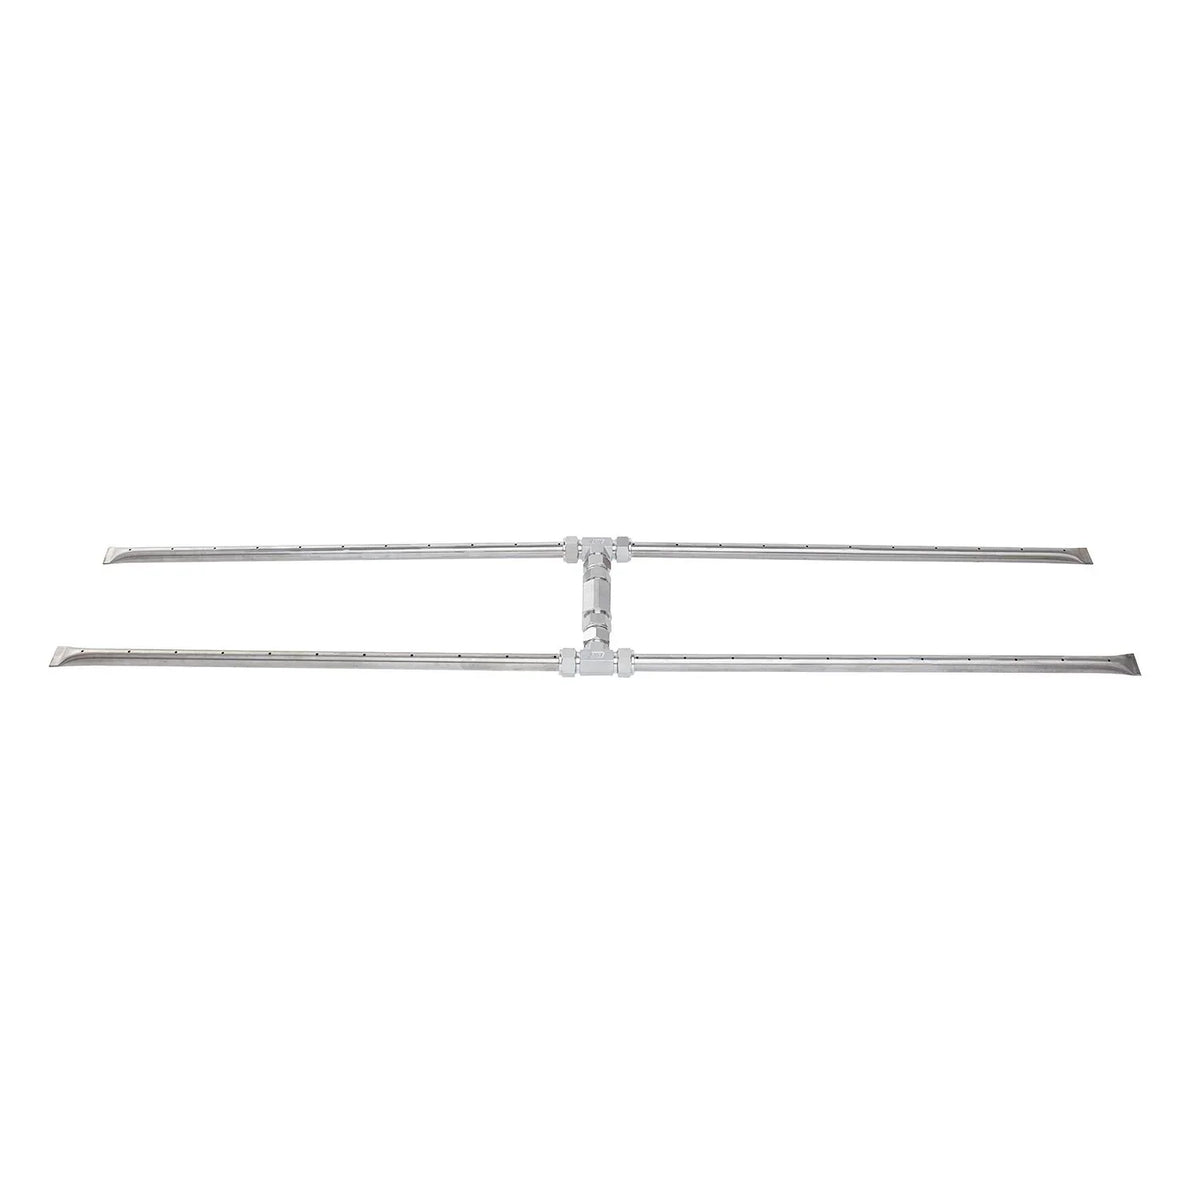 Fire By Design 60" x 6" RHB606NG Marine Grade Stainless Steel Retro H-Style Natural Gas Burner